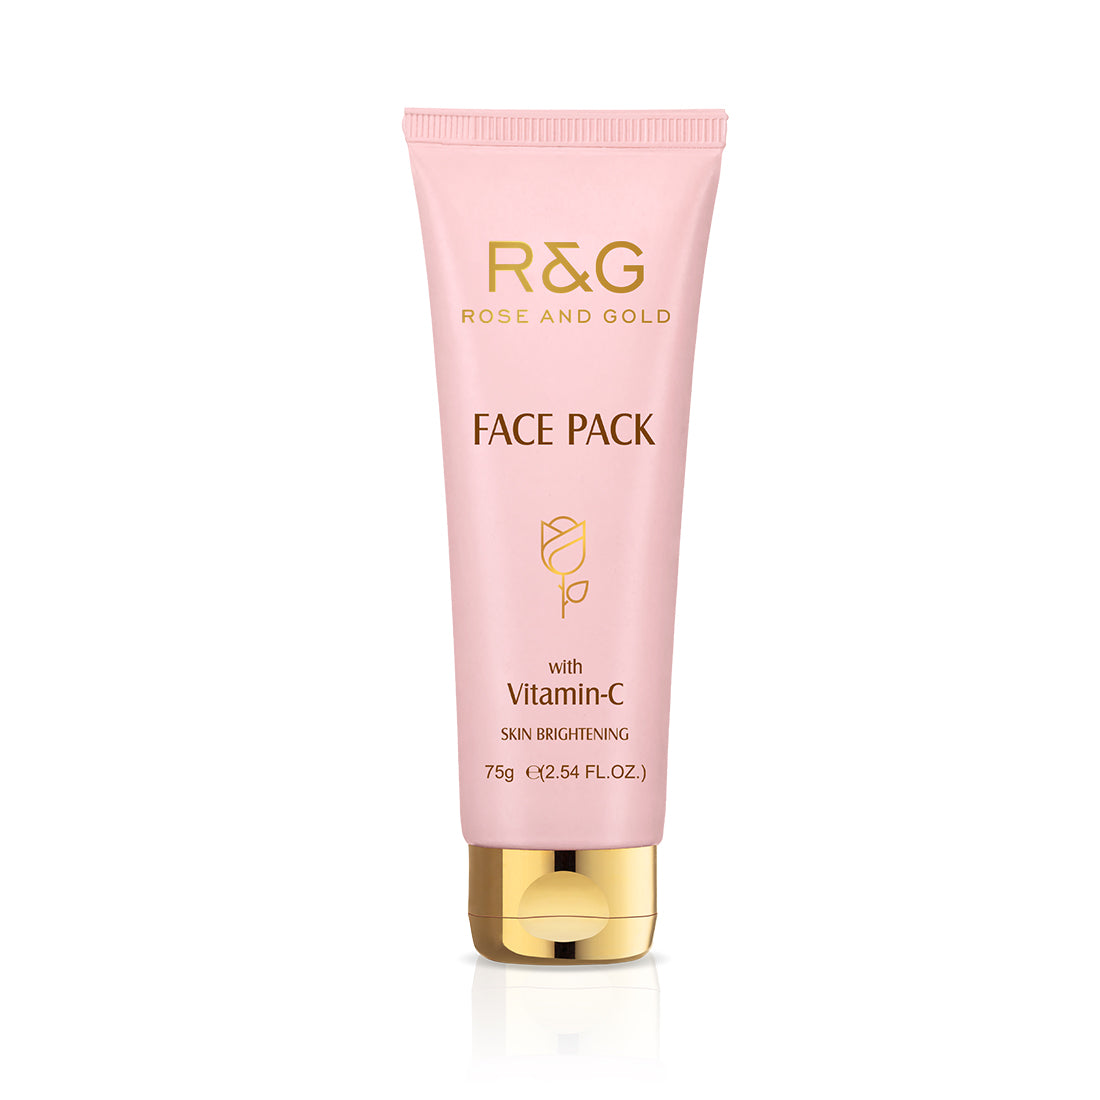 R&G Face Pack For Skin Brightening - Enriched with Vitamin C & Alpha Arbutin - Neutralizes Harsh UV Effect of Sun Rays - Helps to Even Skin Tone & Minimize Age Spots - VasuStore